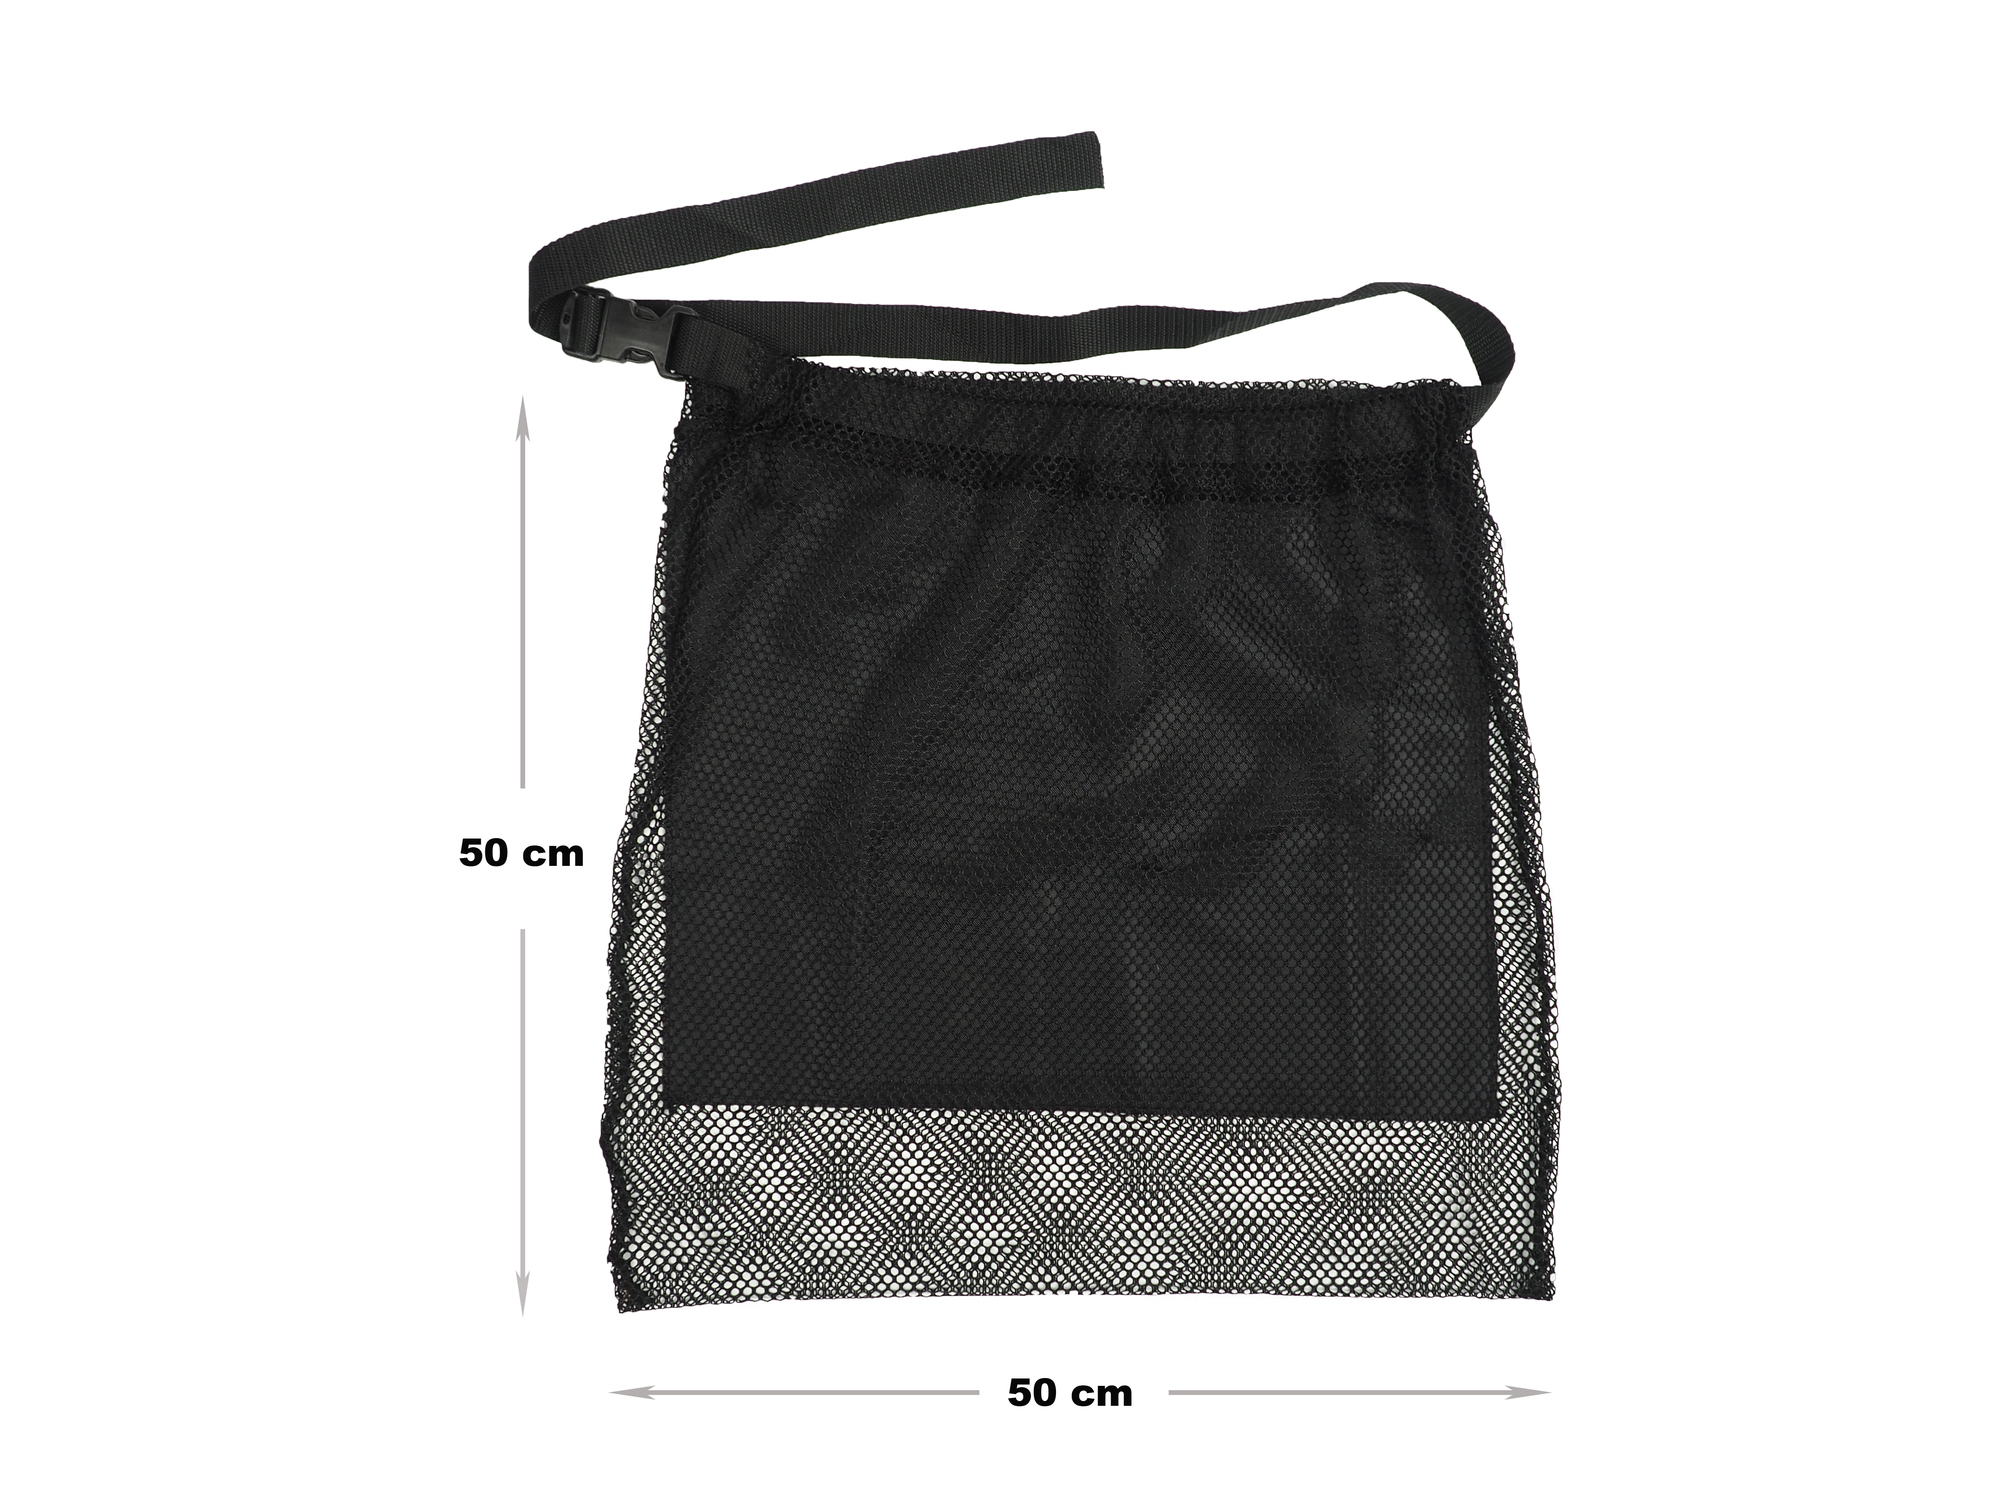 DivePRO Large Size Cray Bag Waist Lobster Catch Bag with Waist Strap ...